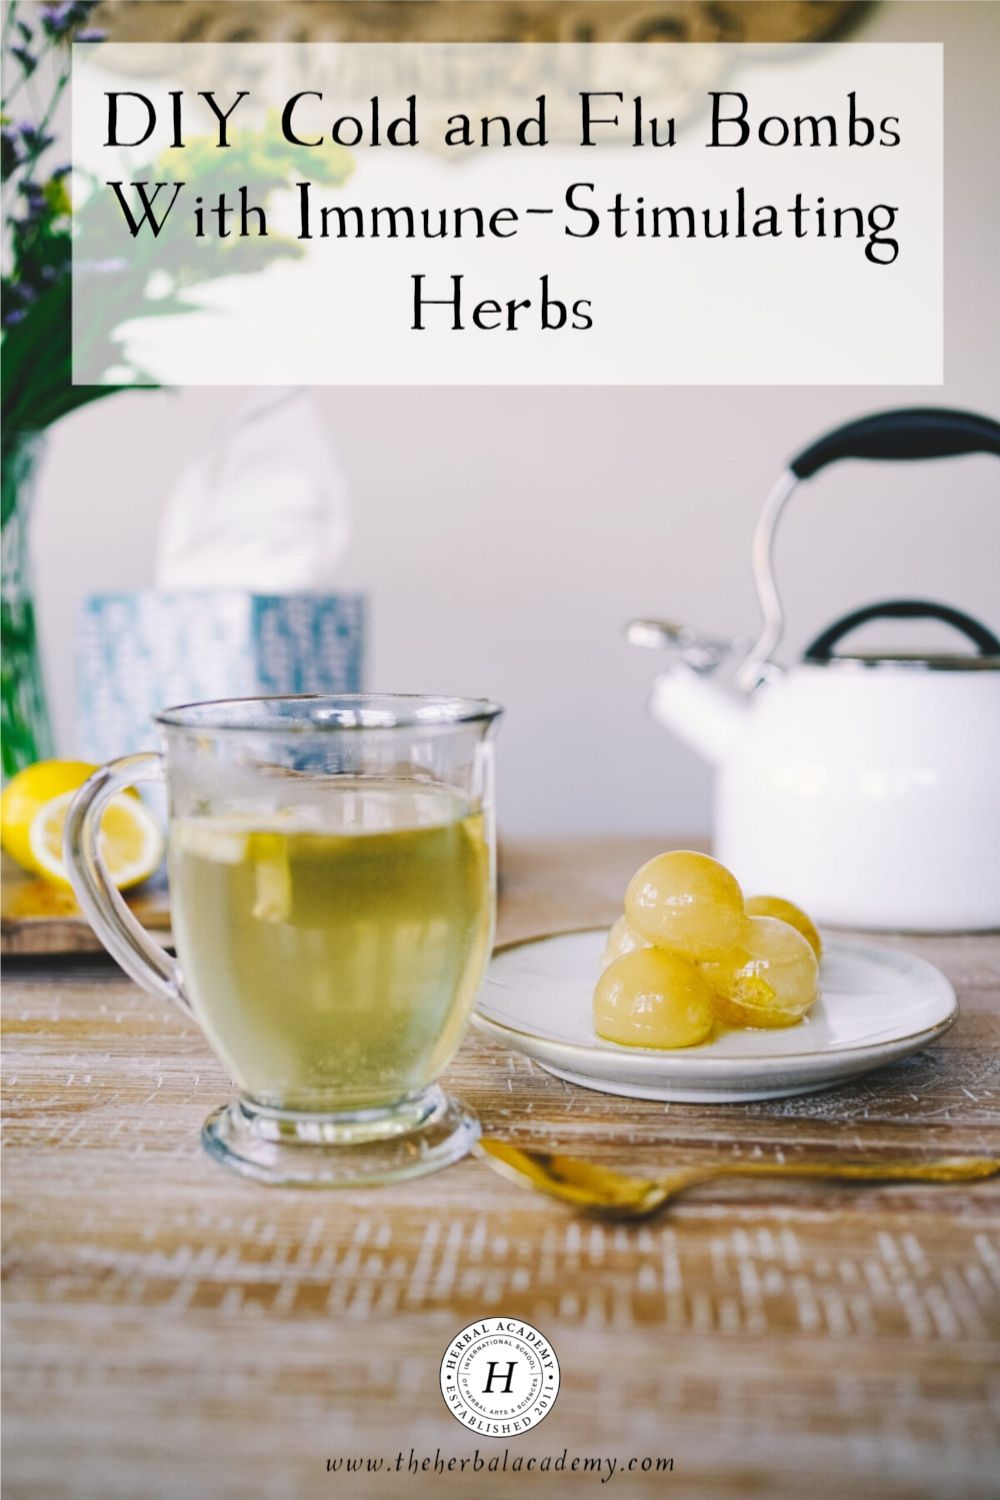 DIY Cold and Flu Bombs With Immune-Stimulating Herbs | Herbal Academy | One option for preparing ahead for cold and flu season is by making a simple recipe like these DIY cold and flu bombs!